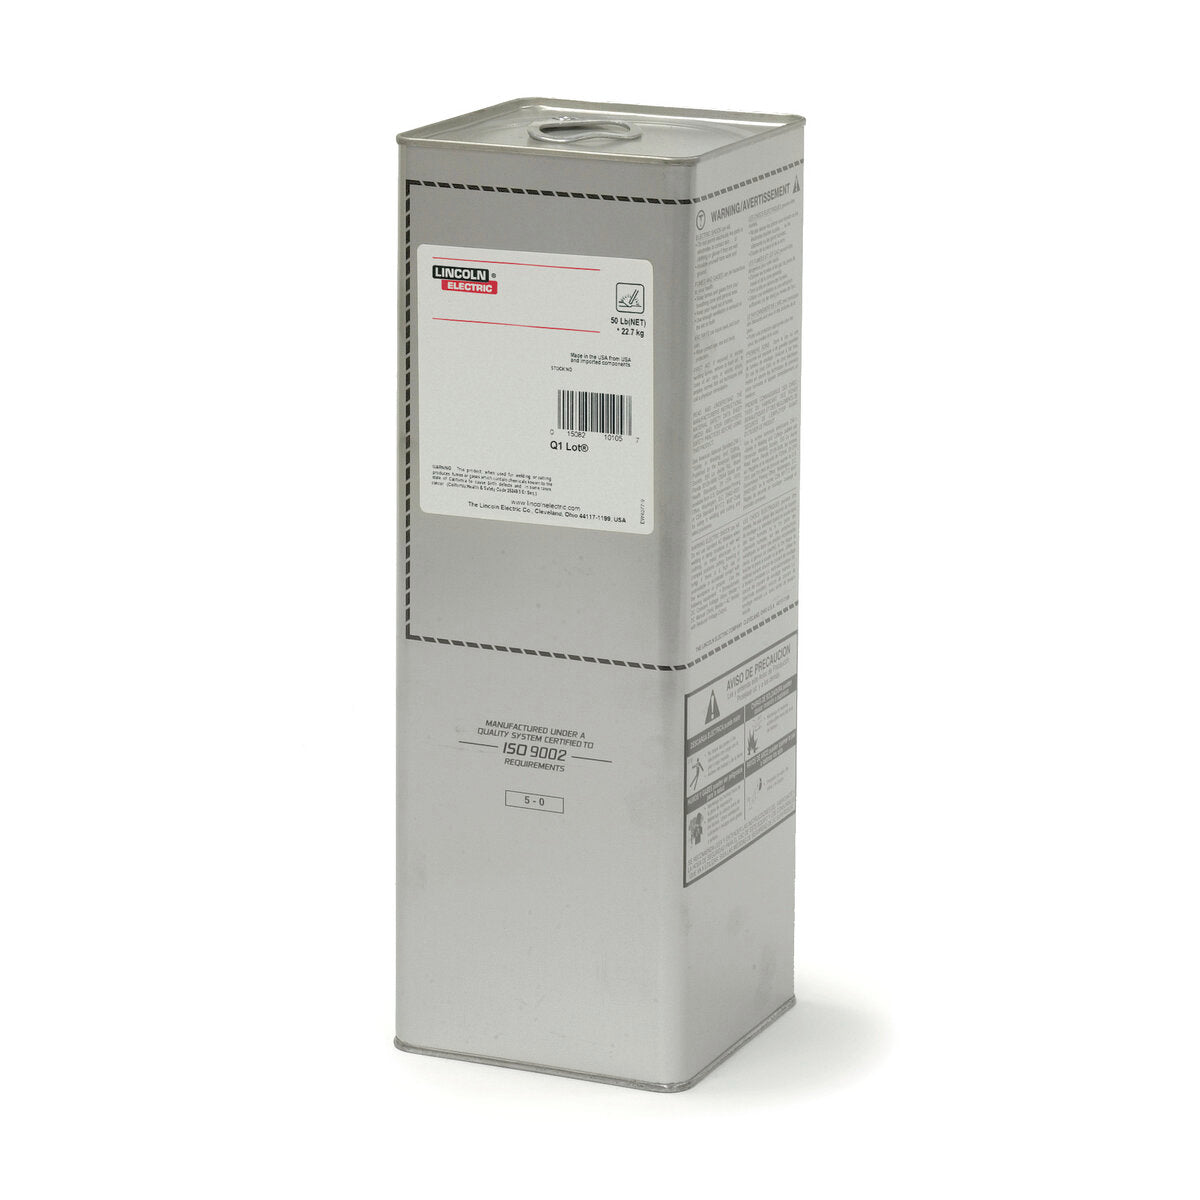 Lincoln Electric - Excalibur® 7018 MR® Stick (SMAW) Electrode, 5/32x14 in, 50 lb Easy Open Can - ED033870